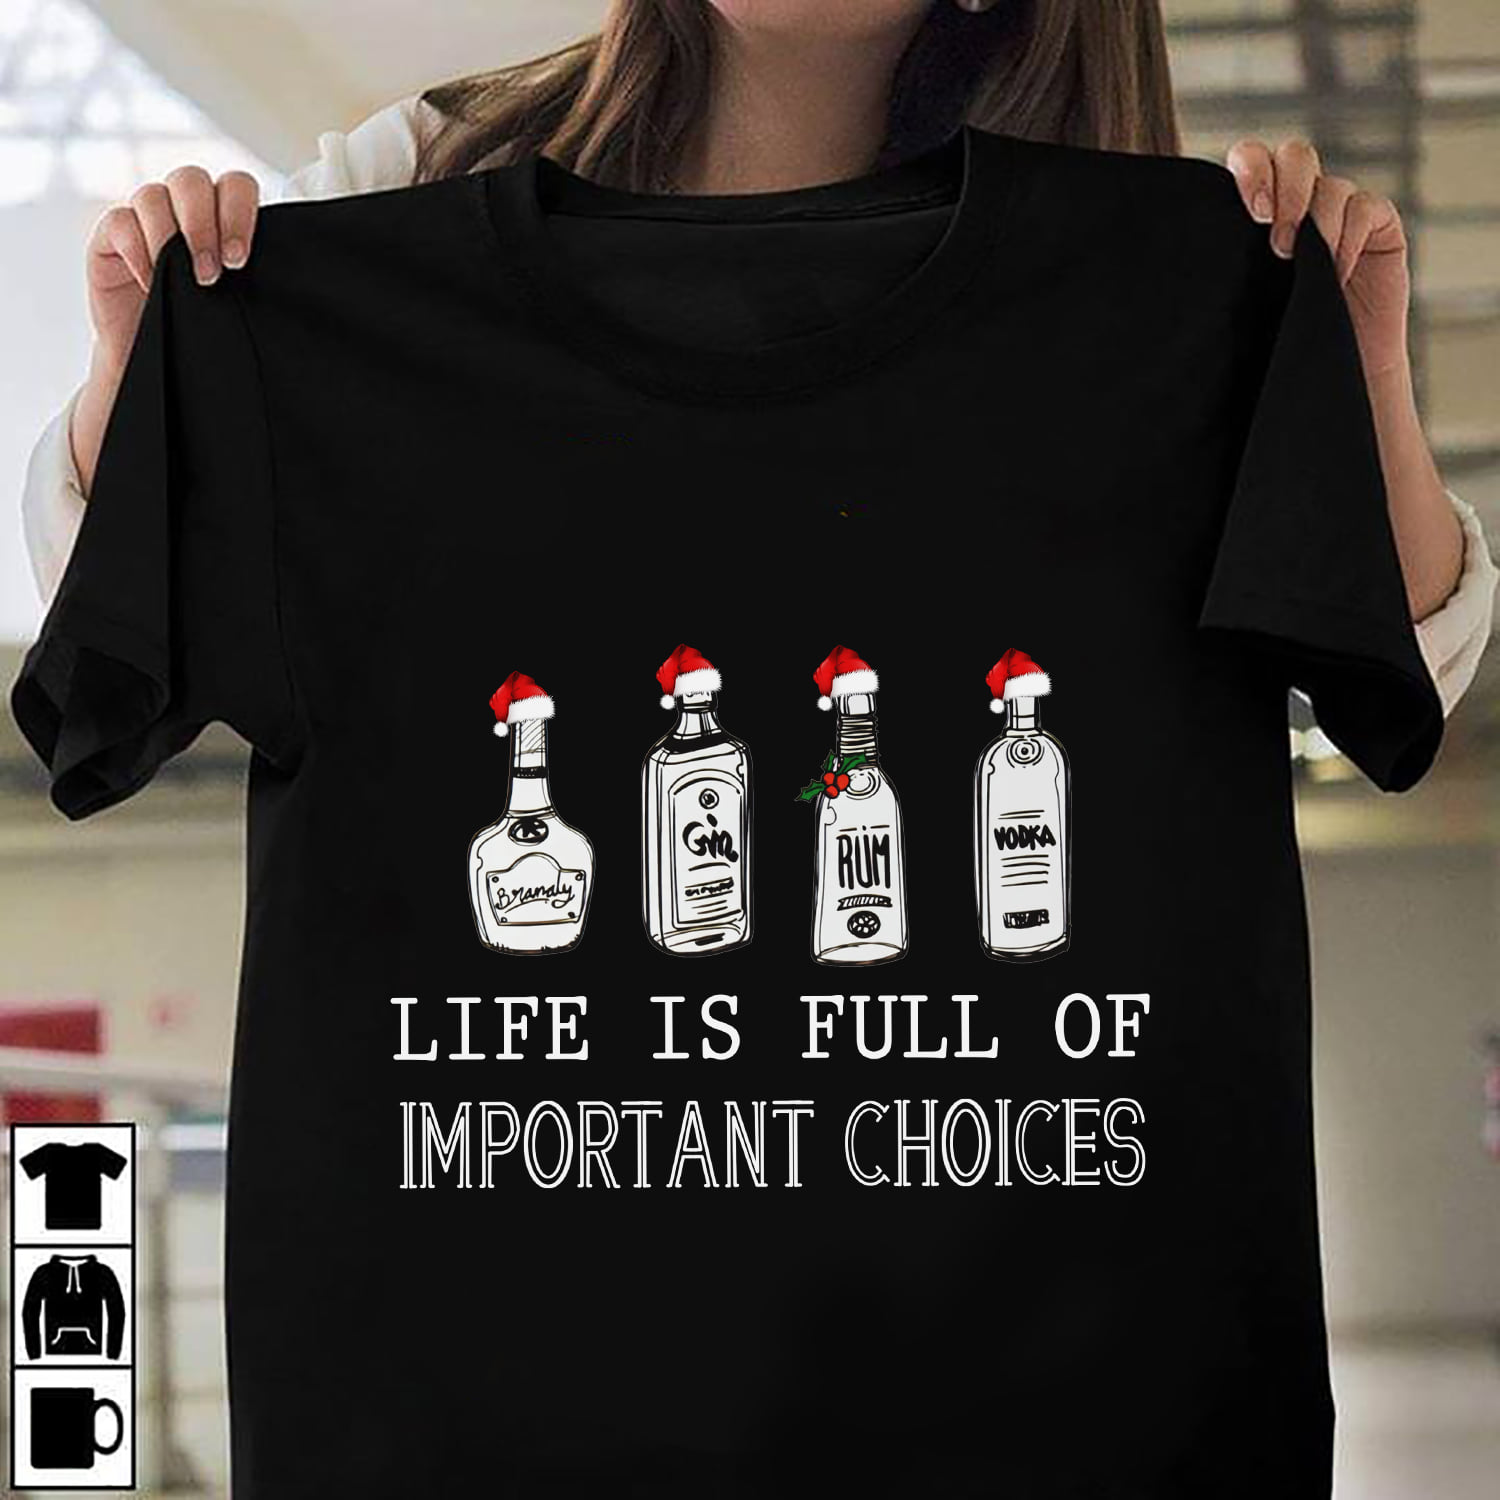 Types of alcohol - Life is full of important choices